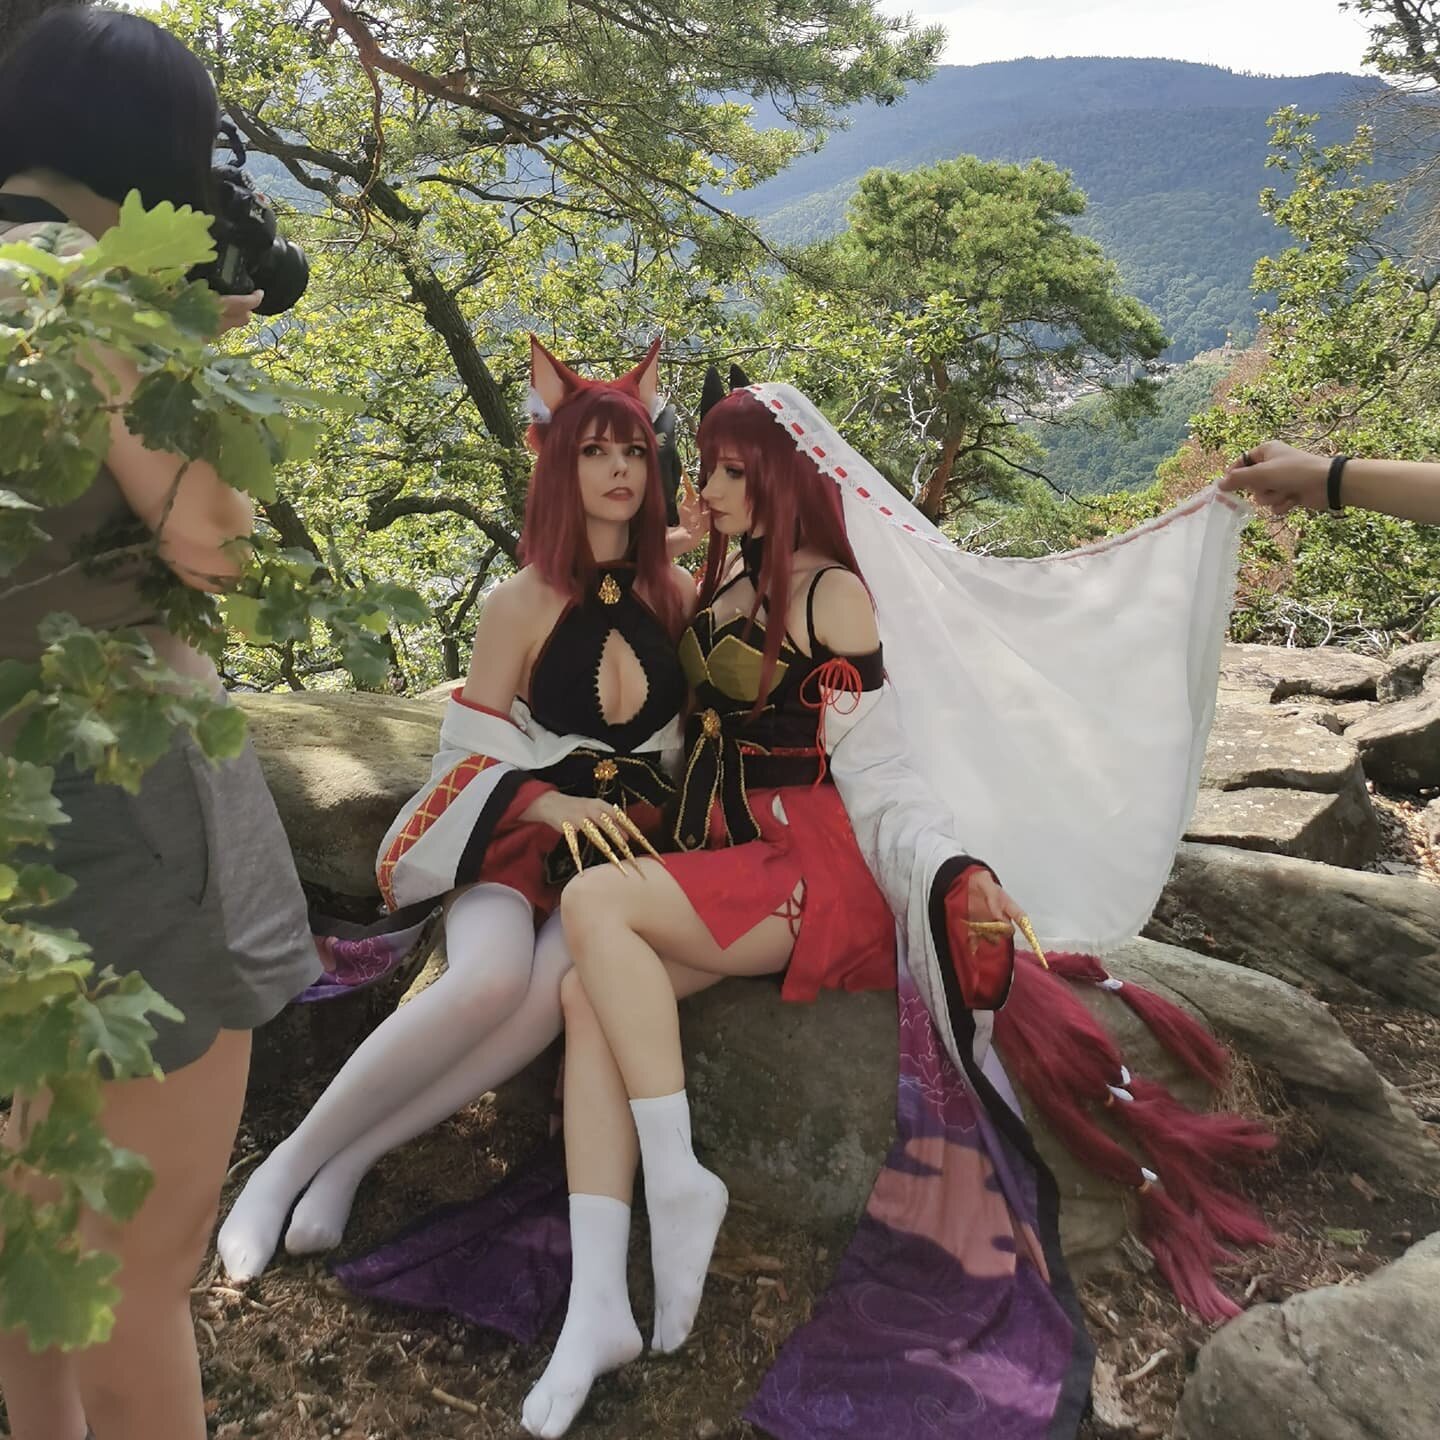 BEHIND THE SCENES from our Azur Lane photo shoot ♡♡♡

I am super happy that so many people were interested in the behind the scenes pics of Deedlit. So we took plenry of bts photos of our latest #AzurLane photo shoot 

@timbercosplay came to visit an